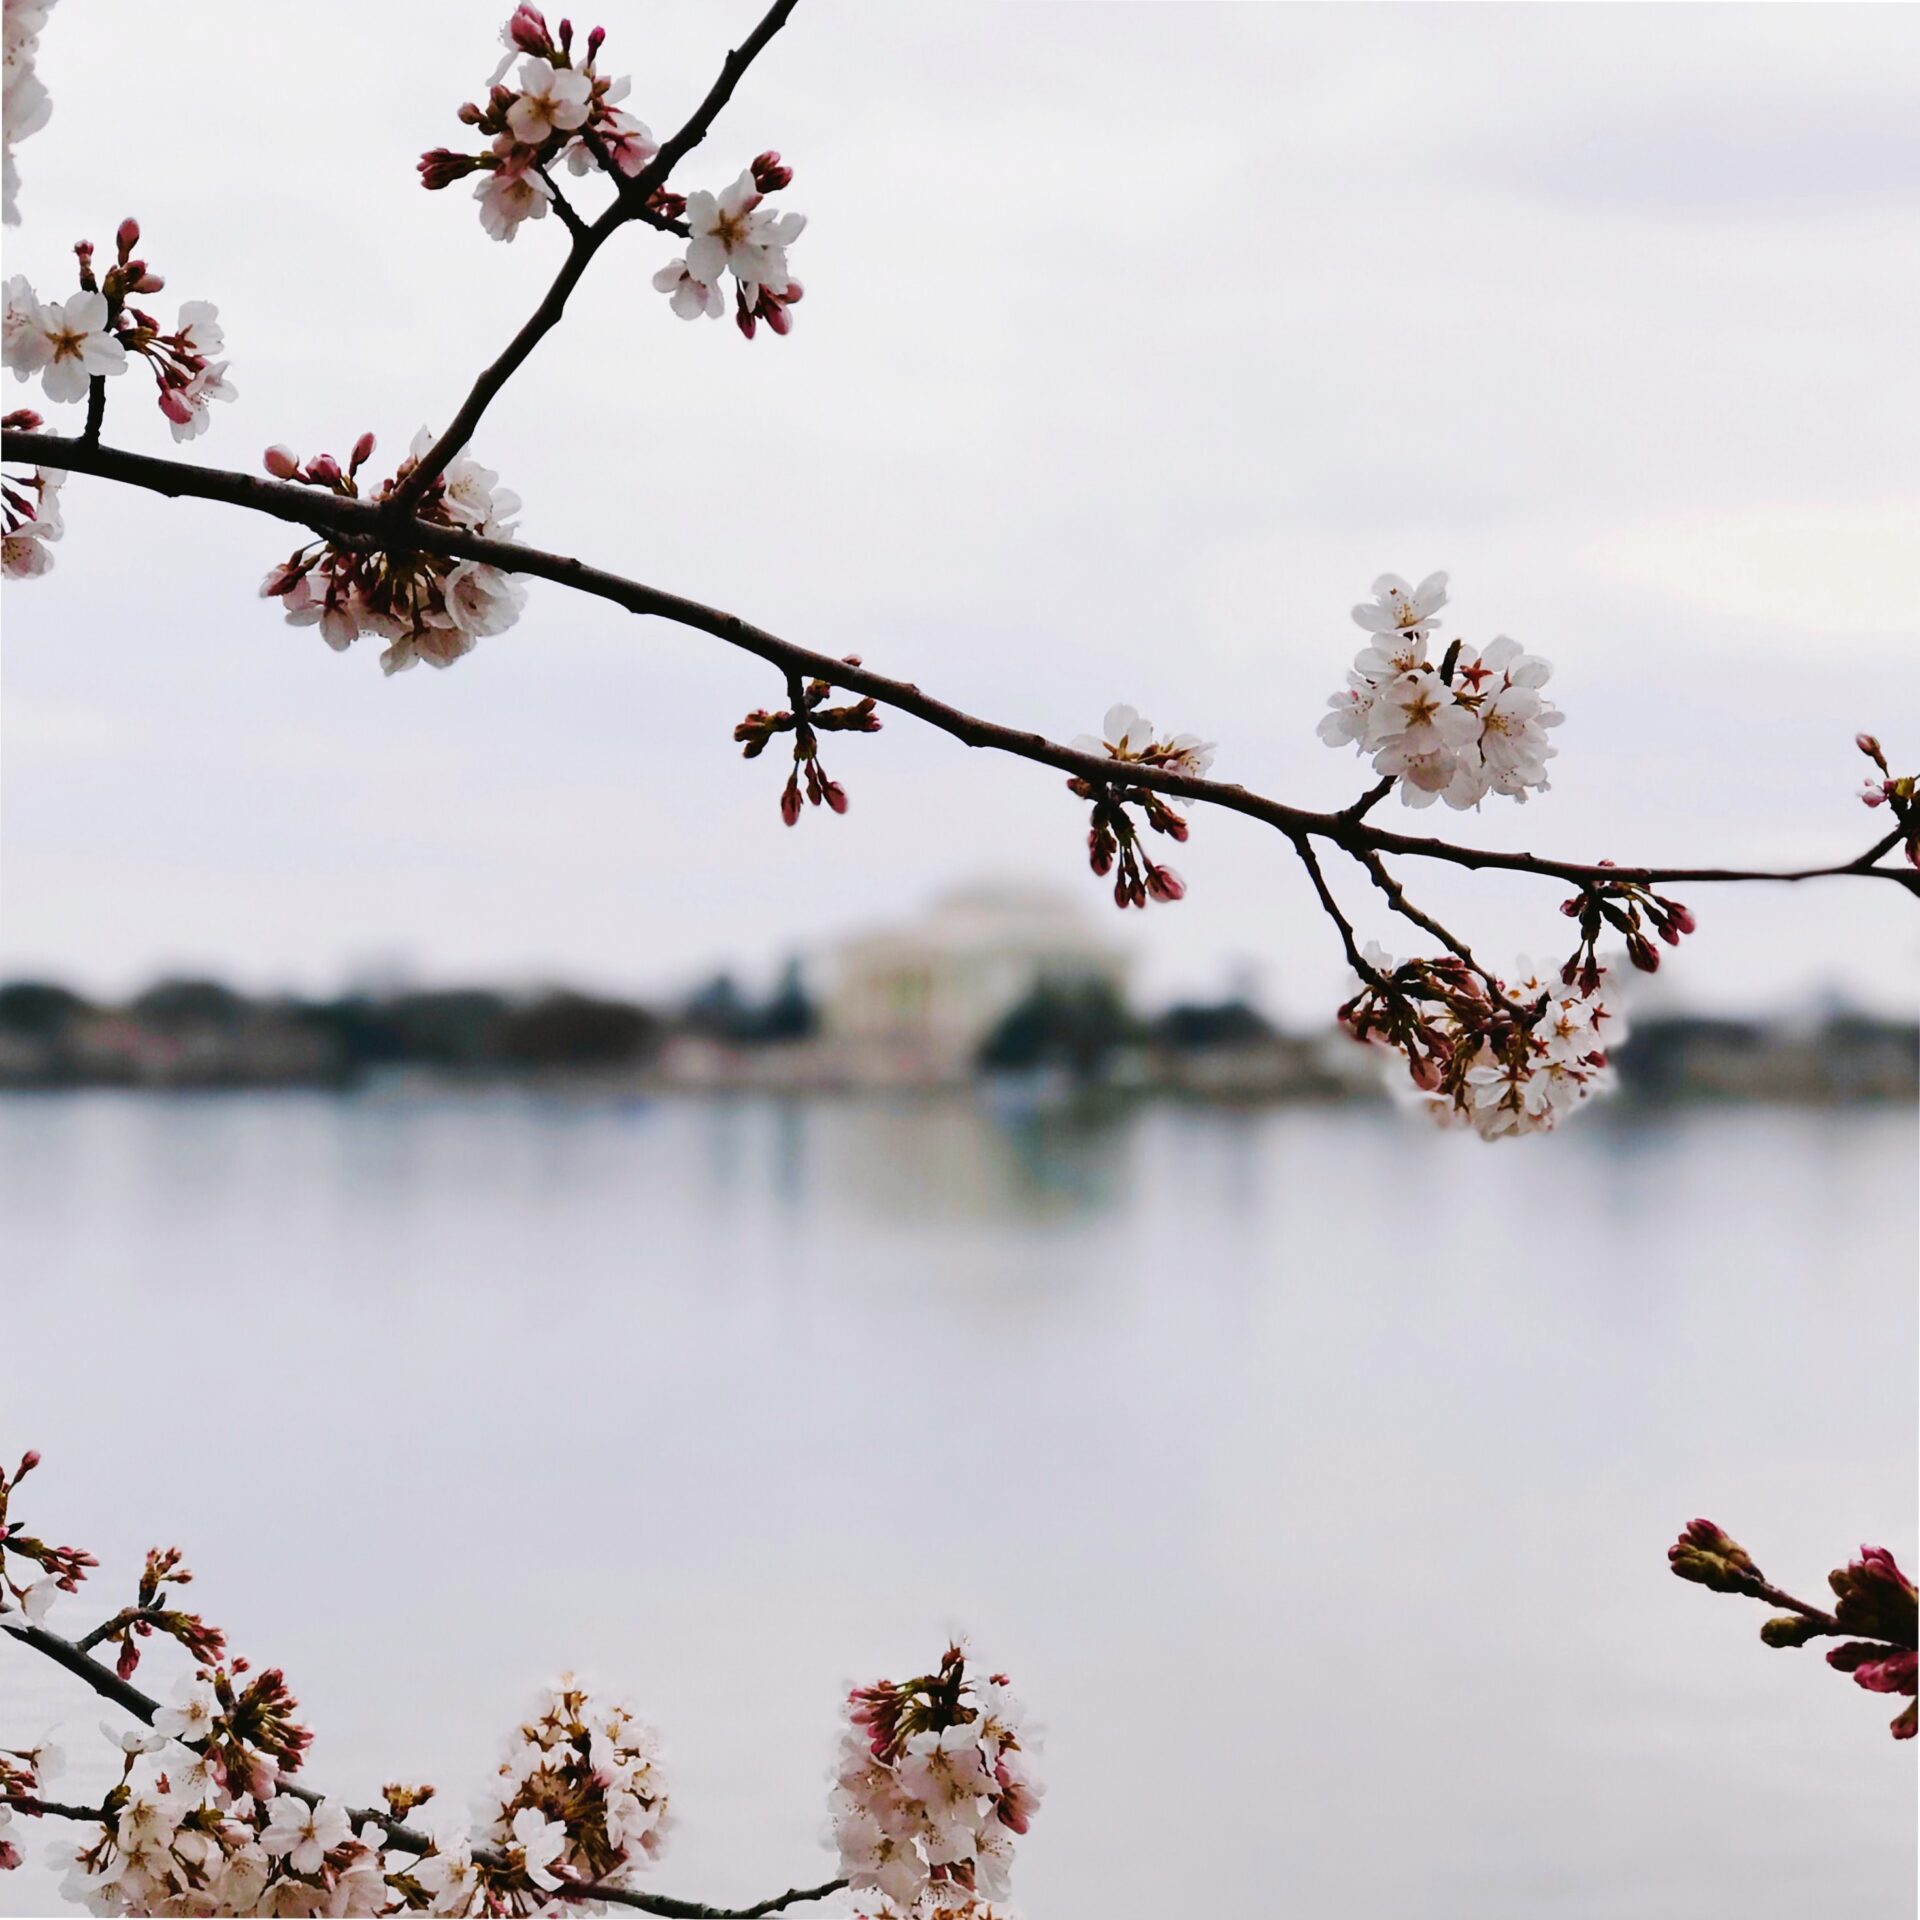 Images of Cherry Blossoms in Washington DC